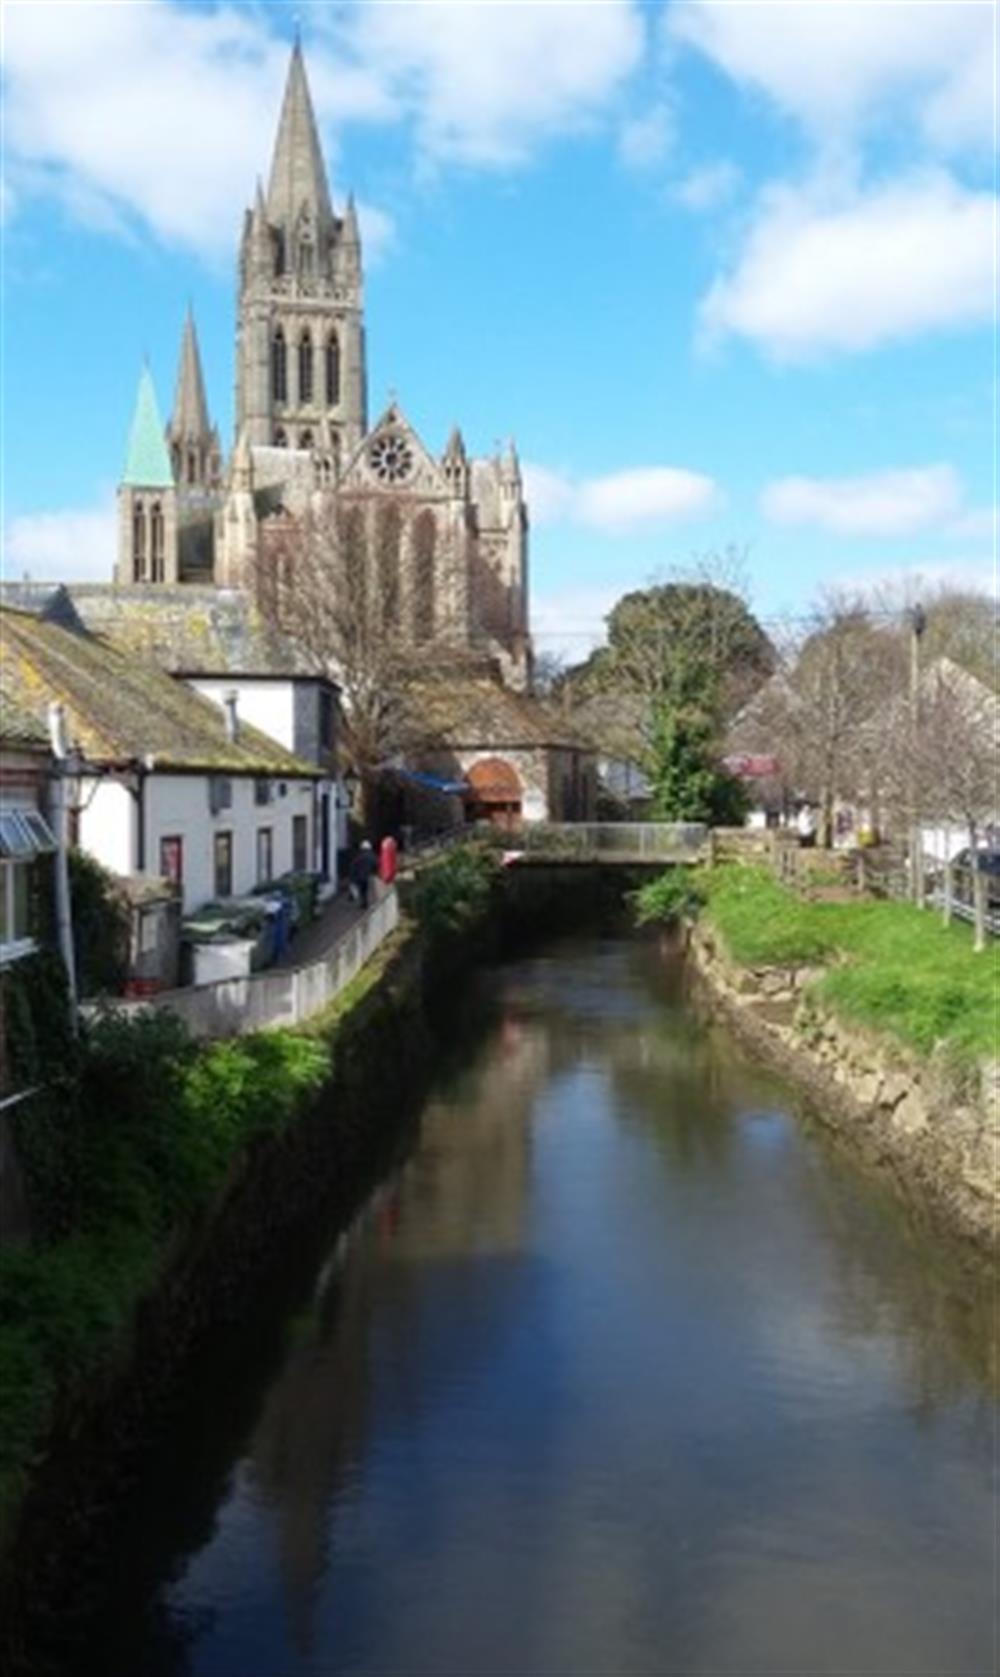 Cornwall's capital, the beautiful Truro, is just half an hour away by car. at Finders, 87 Keeper's Cottage in Maenporth